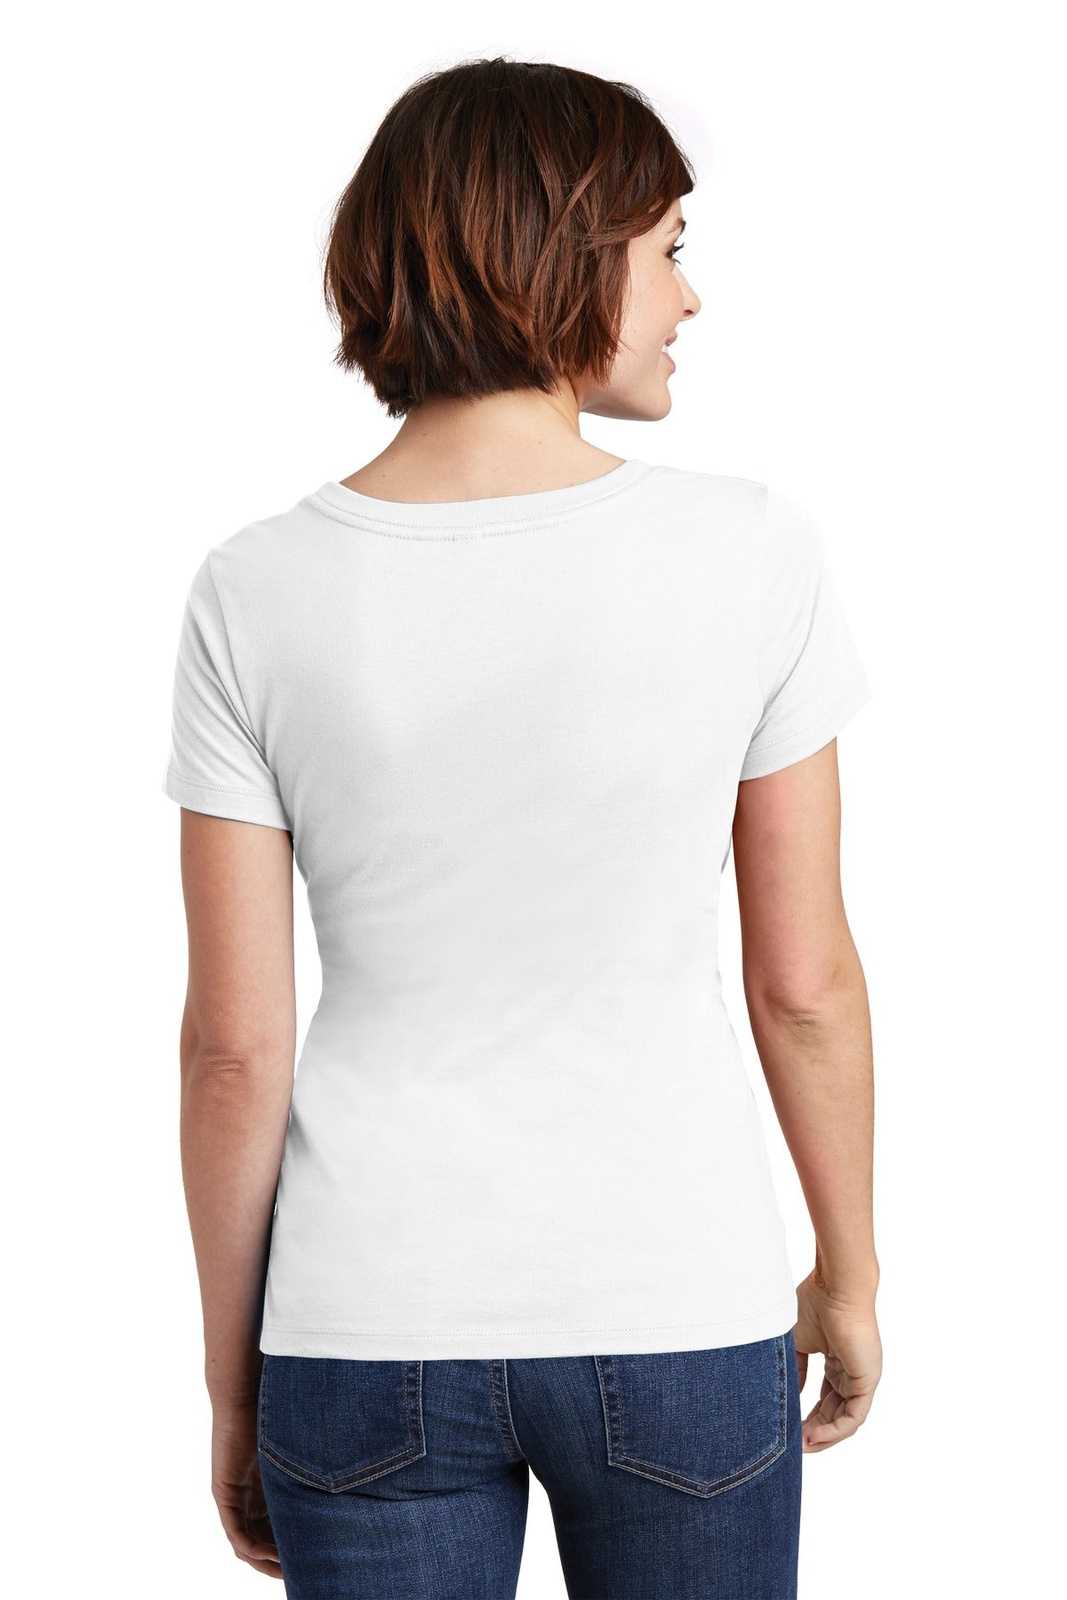 District DM106L Women's Perfect Weight Scoop Tee - Bright White - HIT a Double - 1